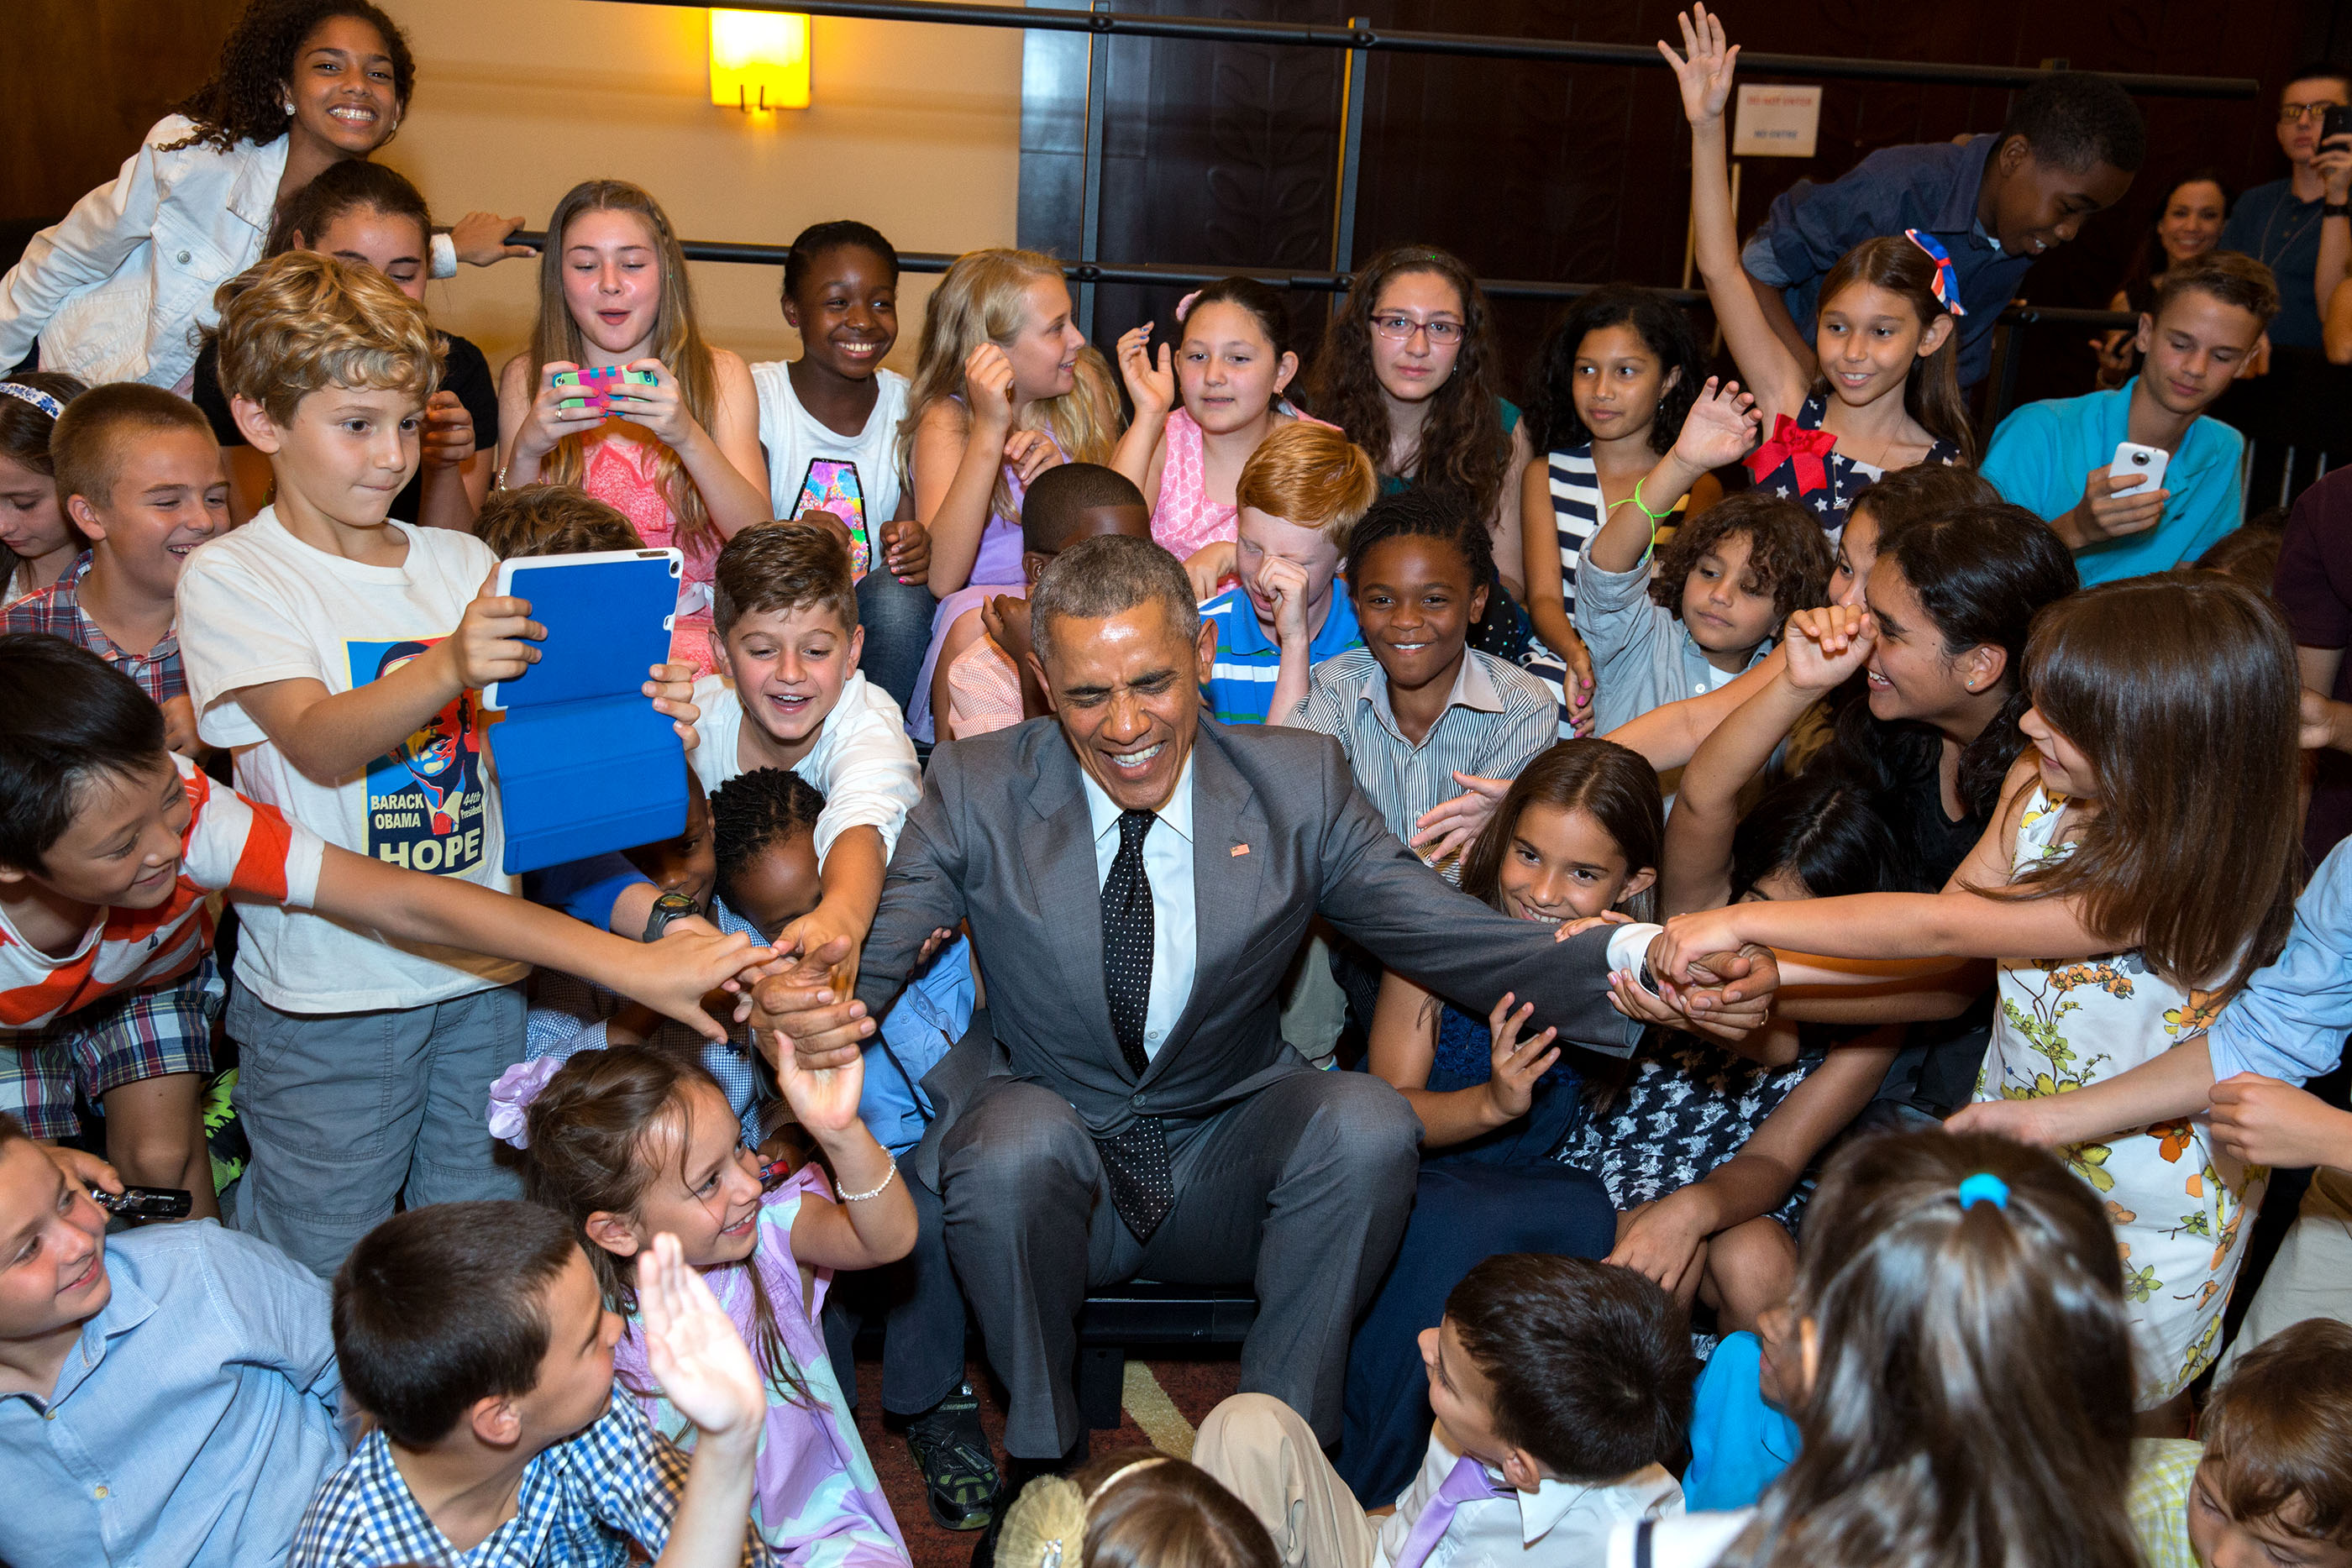 Children of U.S. Embassy personnel help President Obama to his feet after he posed for a group photo with them at the Westin Playa Bonita hotel in Panama City. (Official White House Photo by Pete Souza)